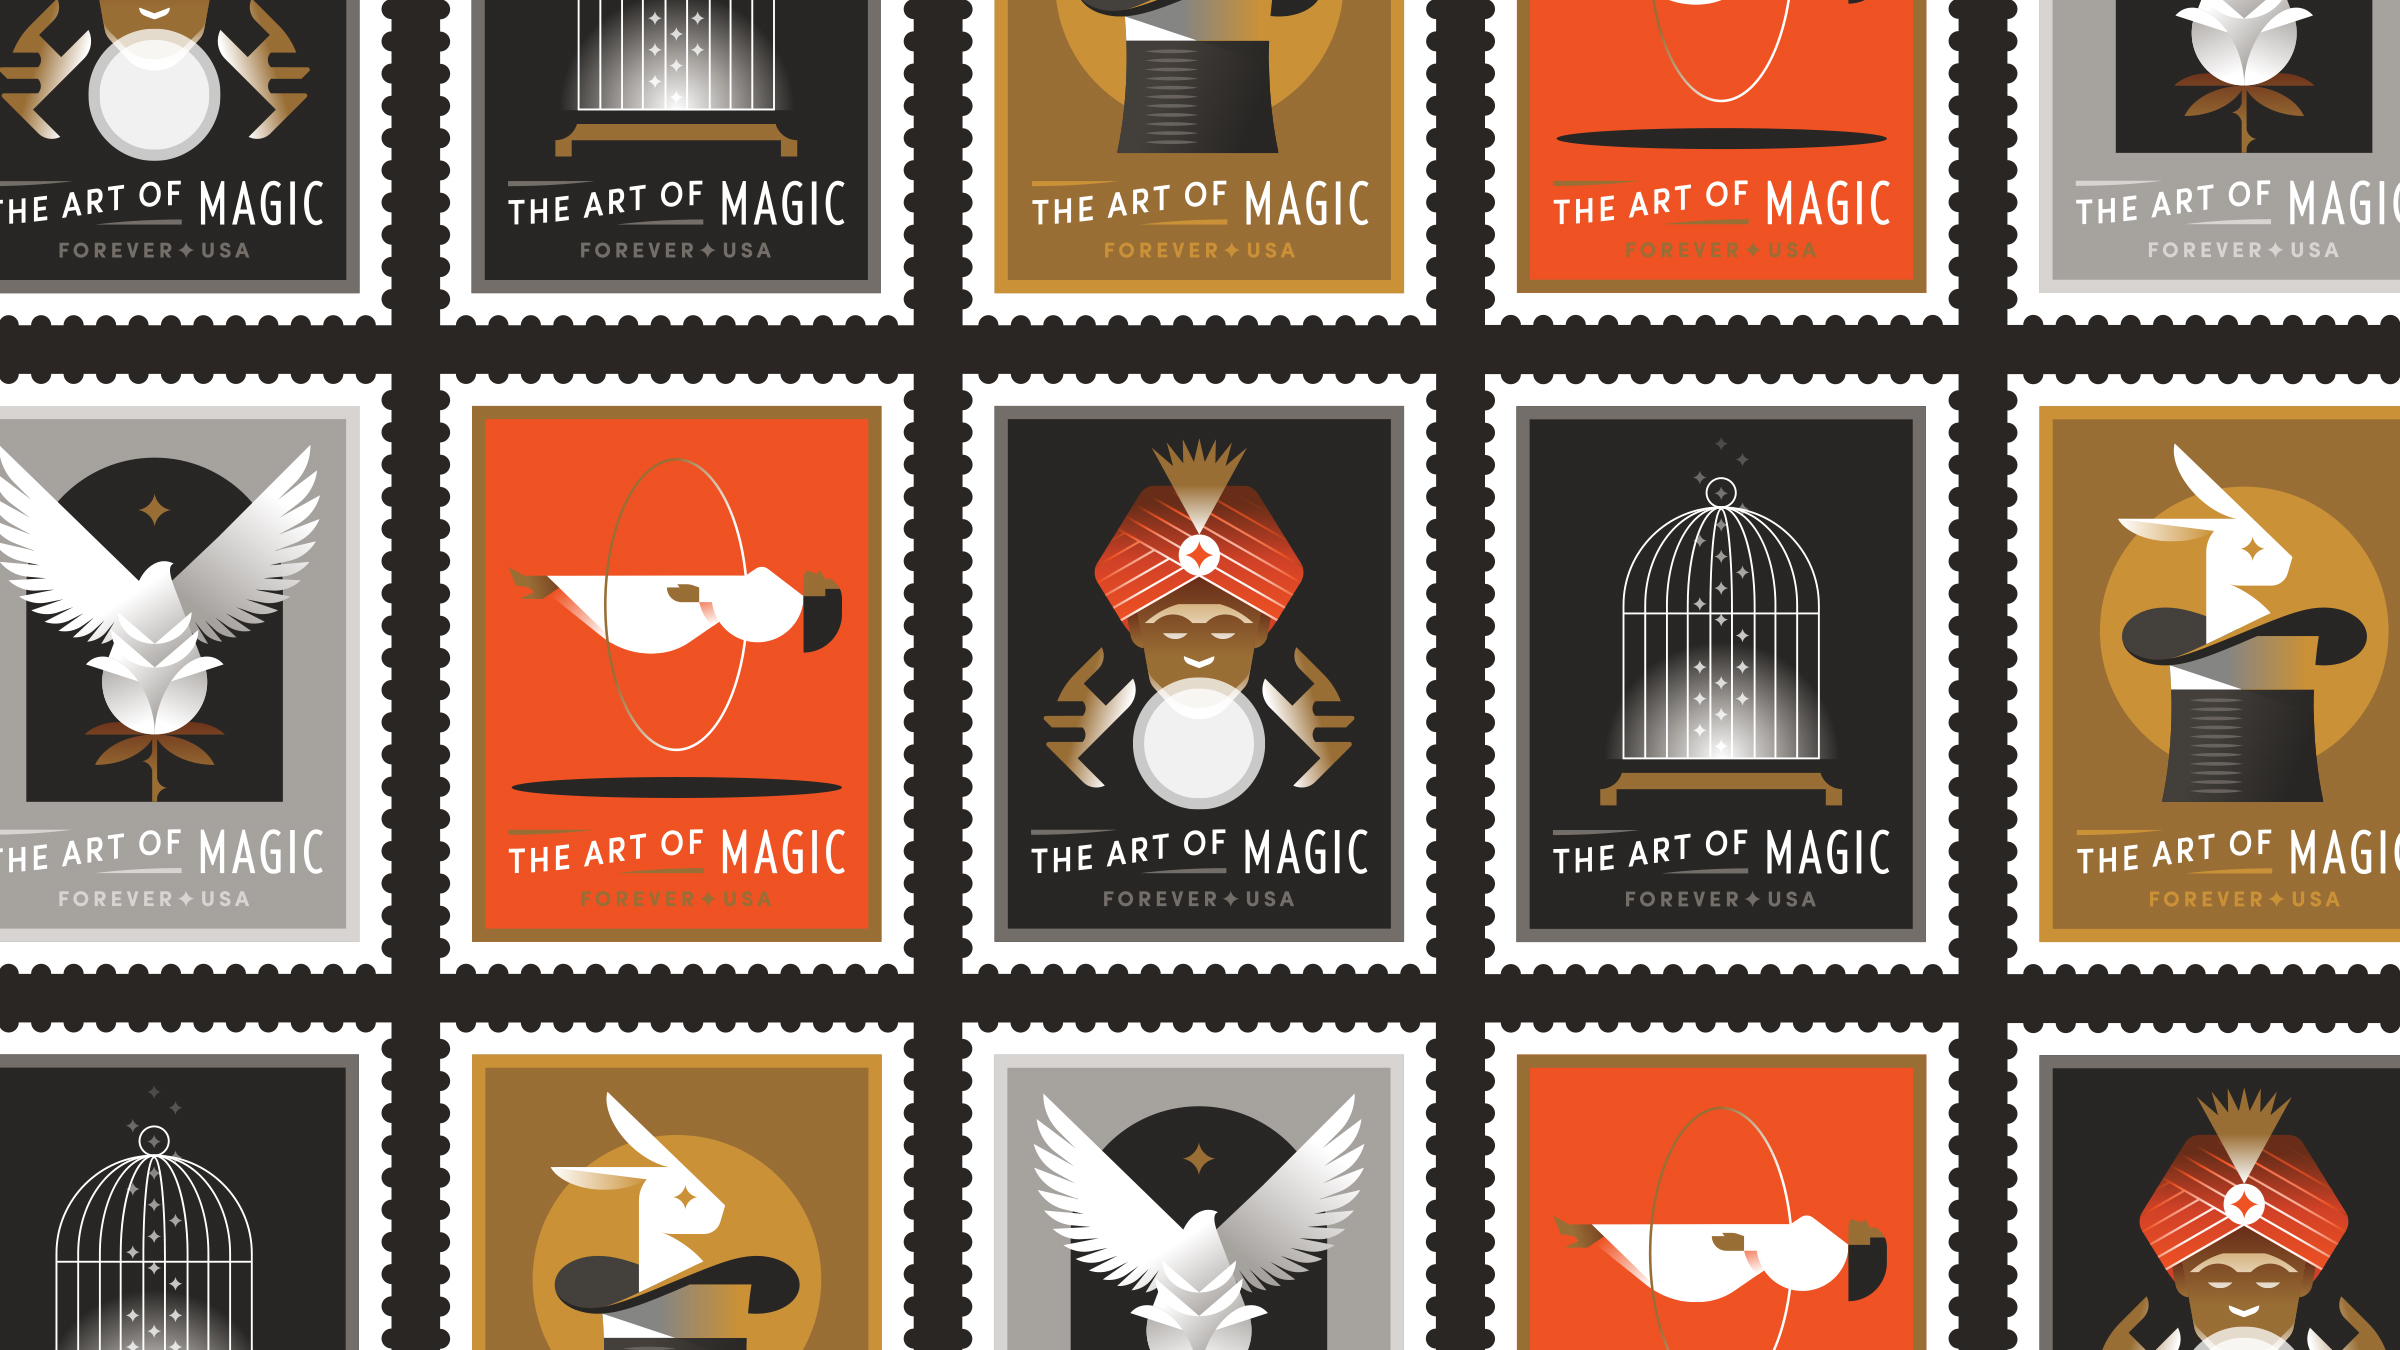 Postage Stamp & Playing Card Design for the US Postal Service — Jay Fletcher